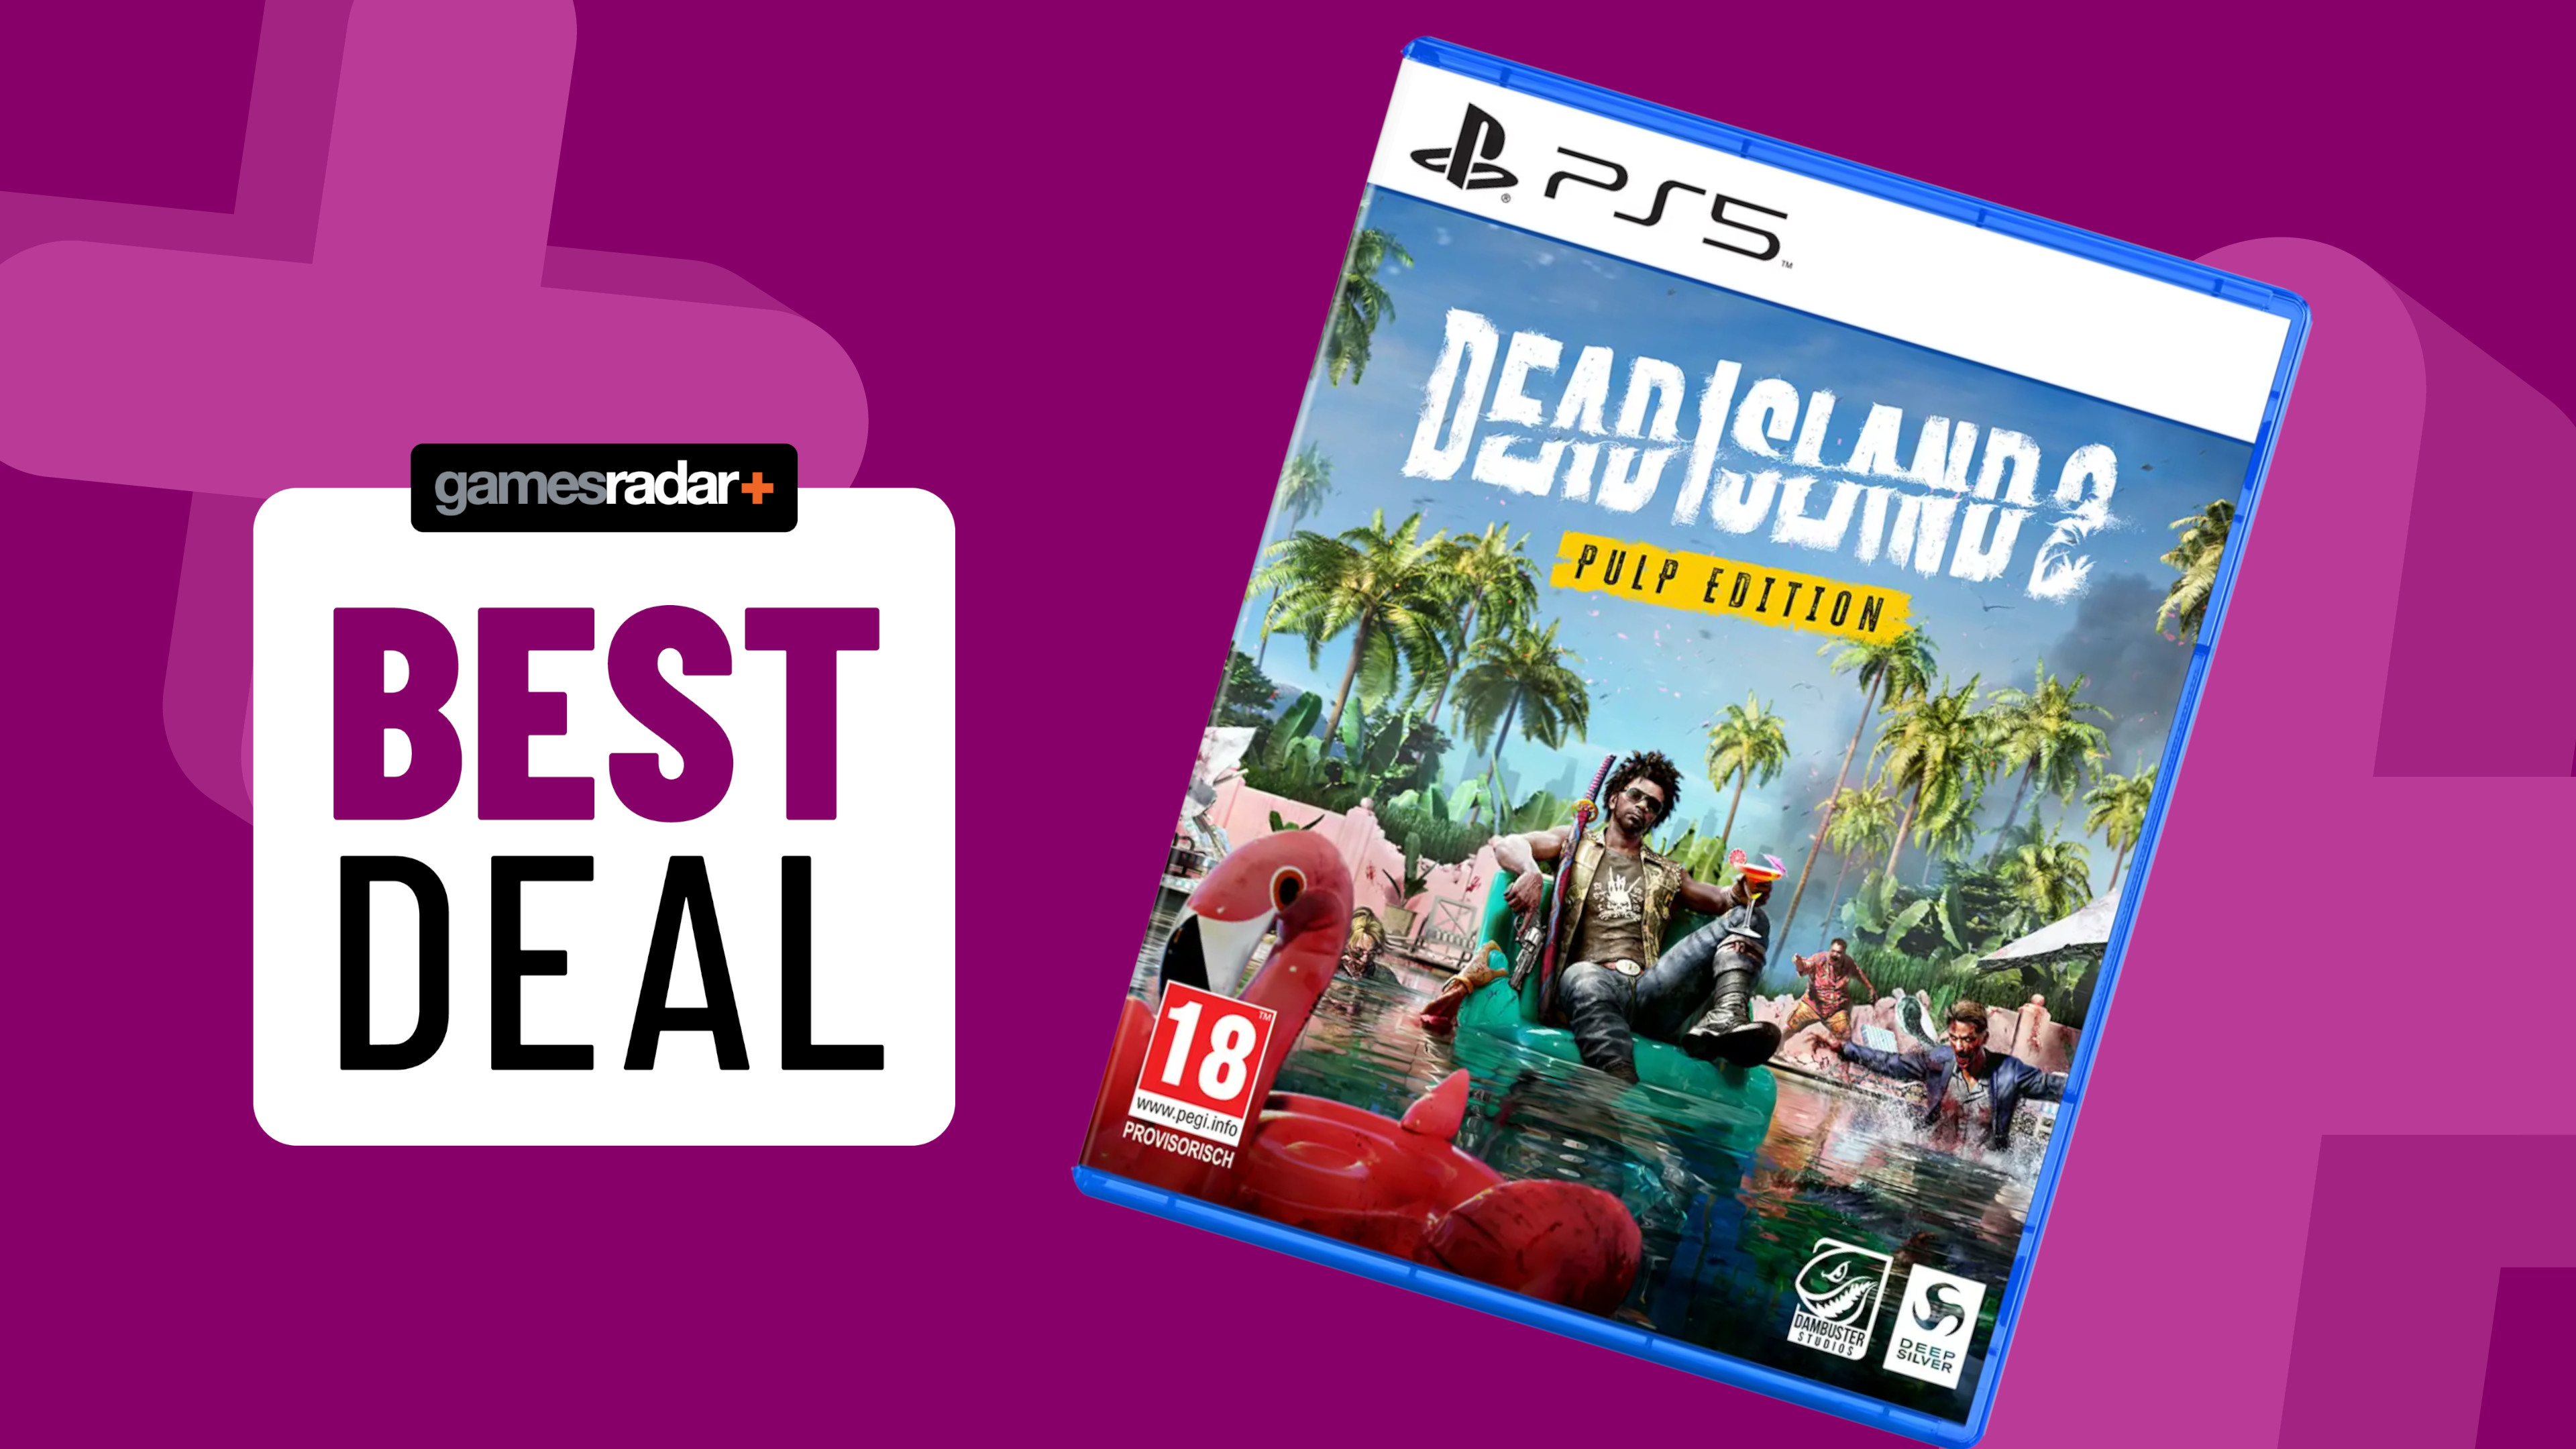 Dead Island Definitive Edition for PS4 only includes first game on disc  [UPDATED]